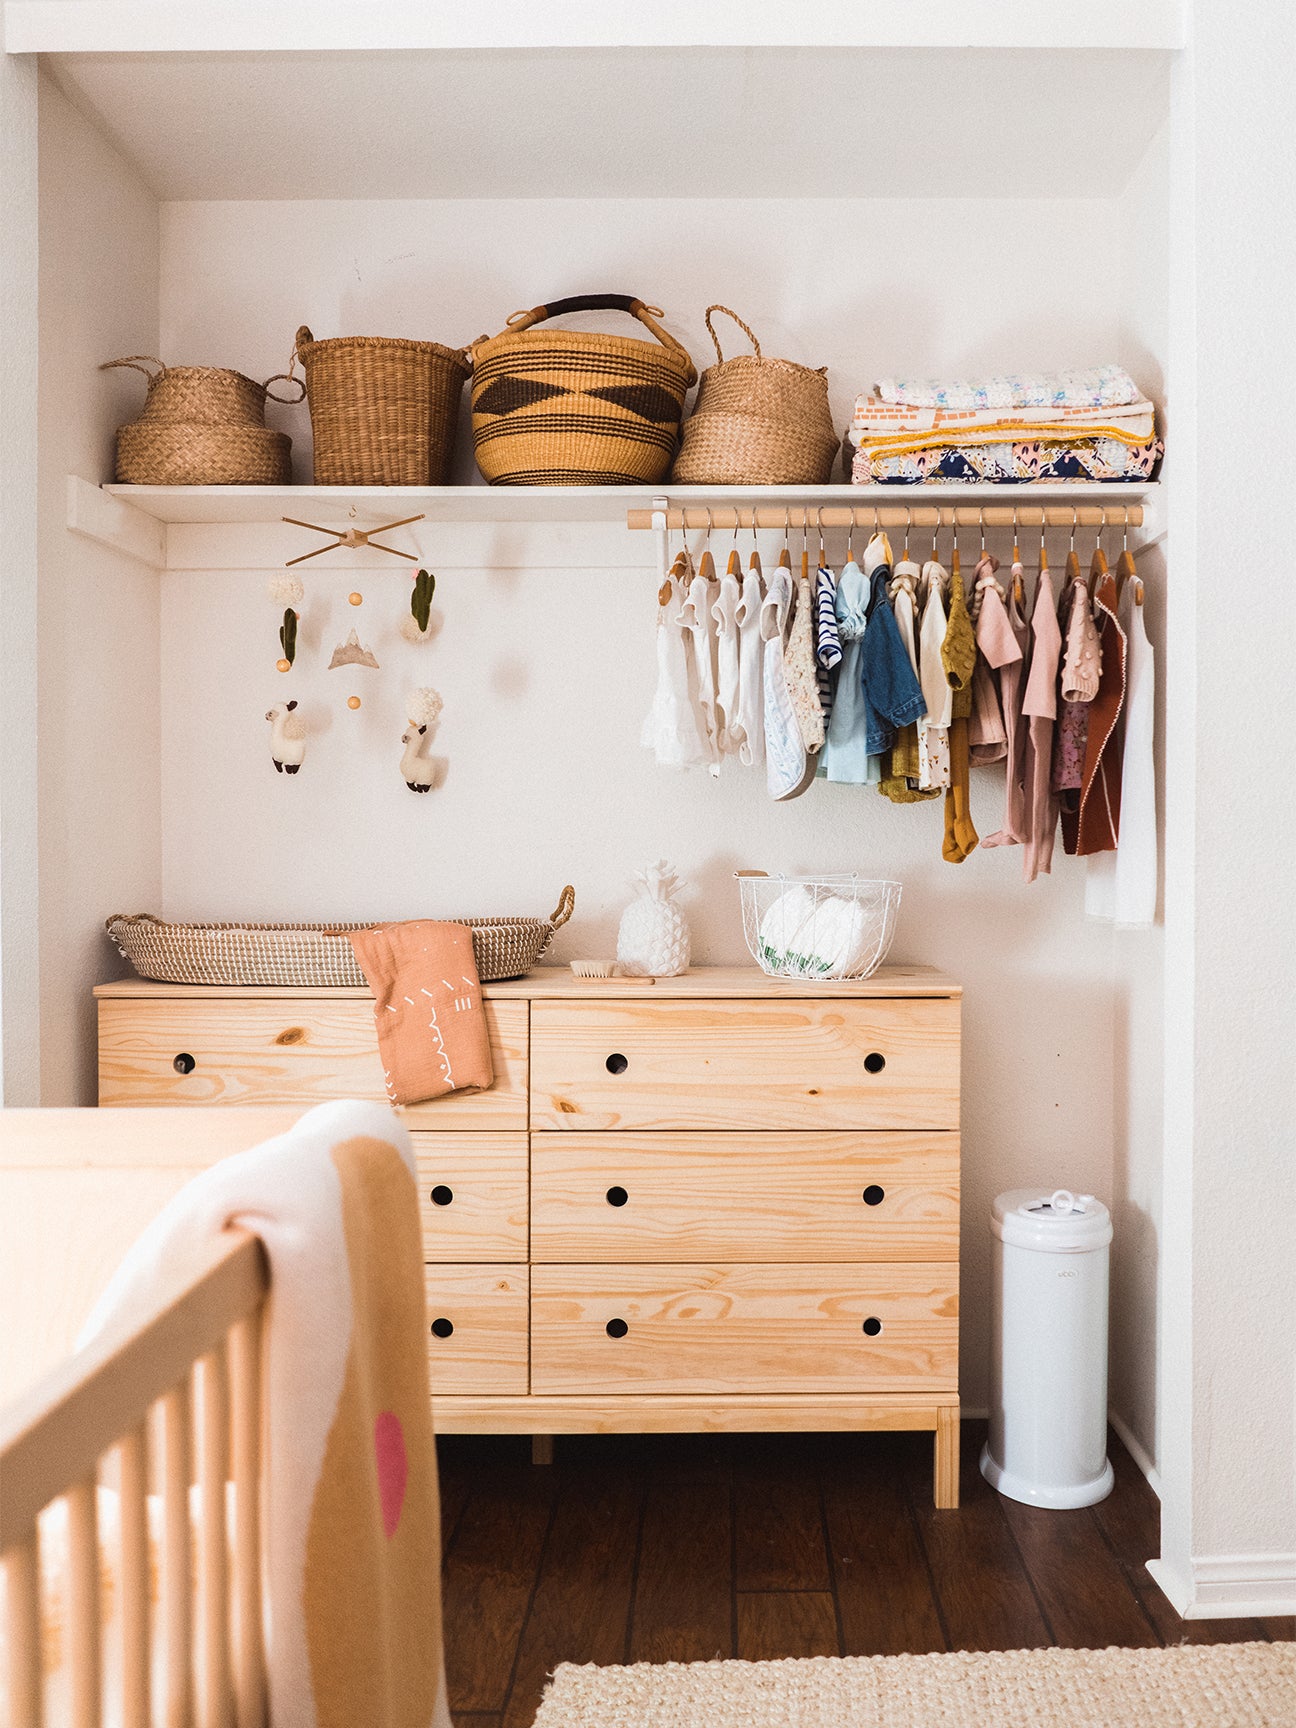 changing table in an aclove witha shelf of clohtes above